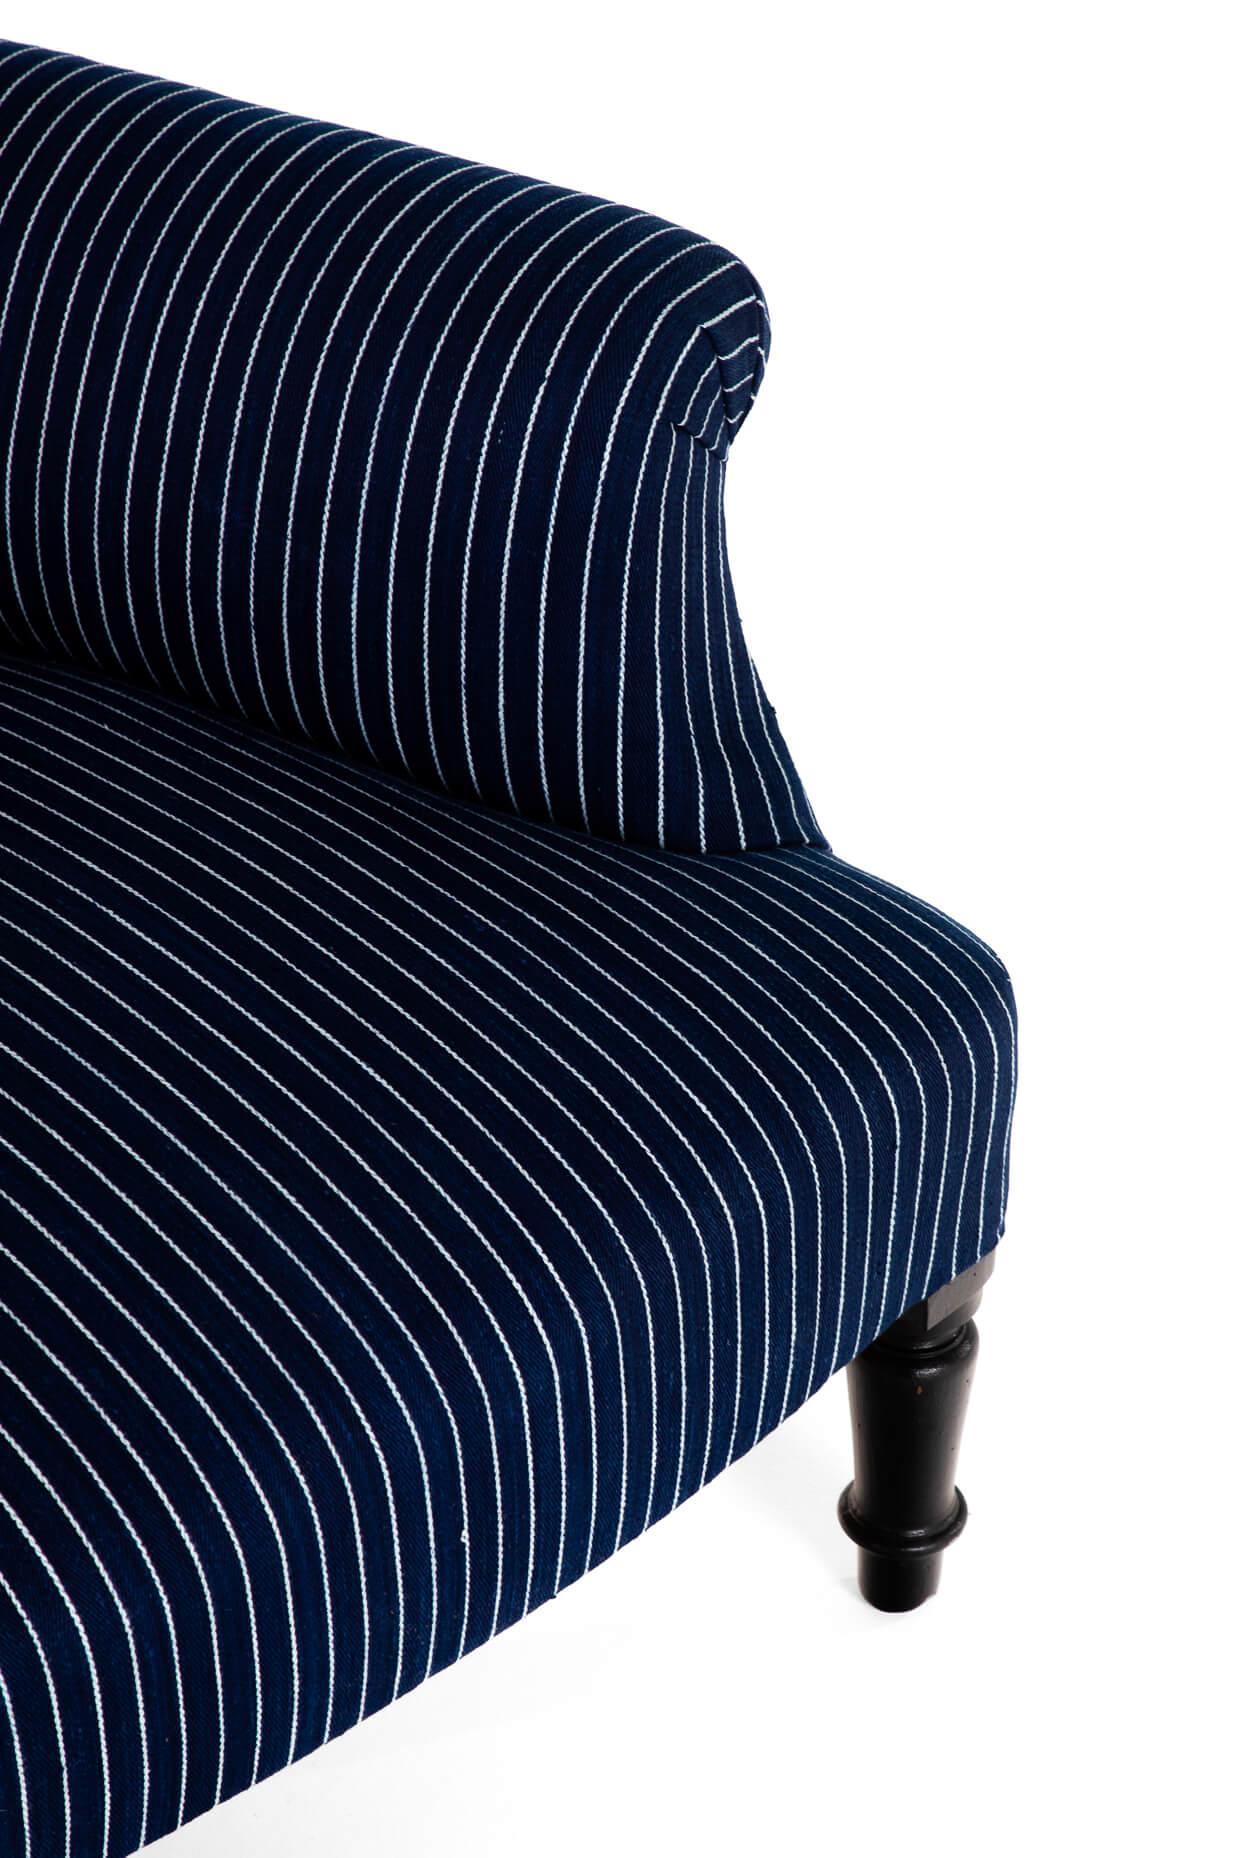 19th Century Pair of Napoleon armchairs in Woven Navy Stripe For Sale